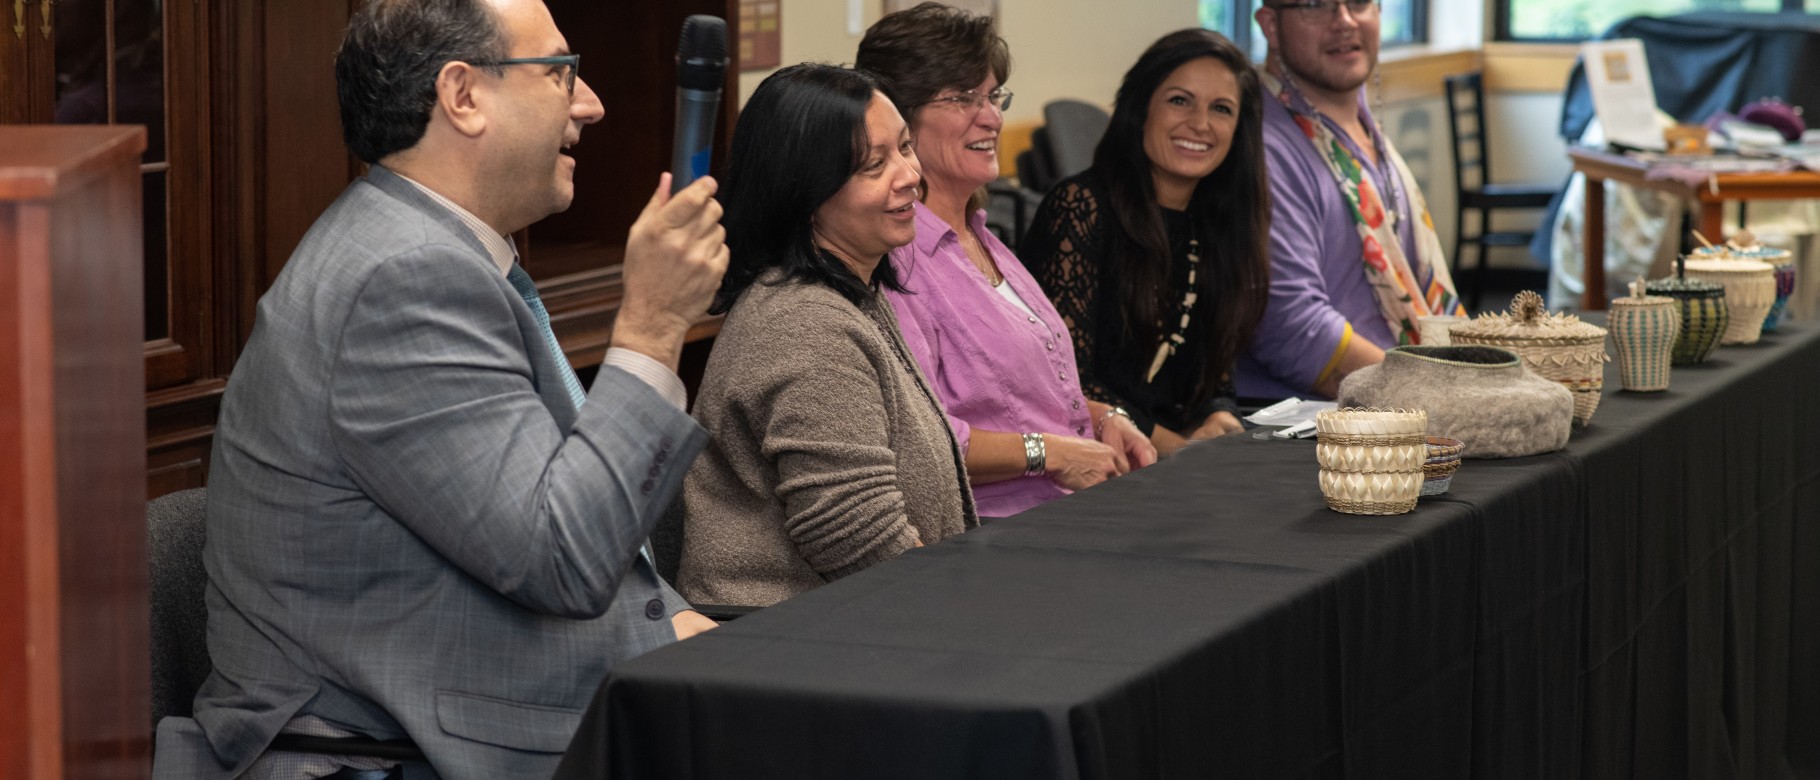 Speakers at UNE’s 2018 Donna M. Loring Lecture (L-R): Darren Ranco, Jennifer Neptune, Pam Outdusis Cunningham, Sarah Sockbeson a